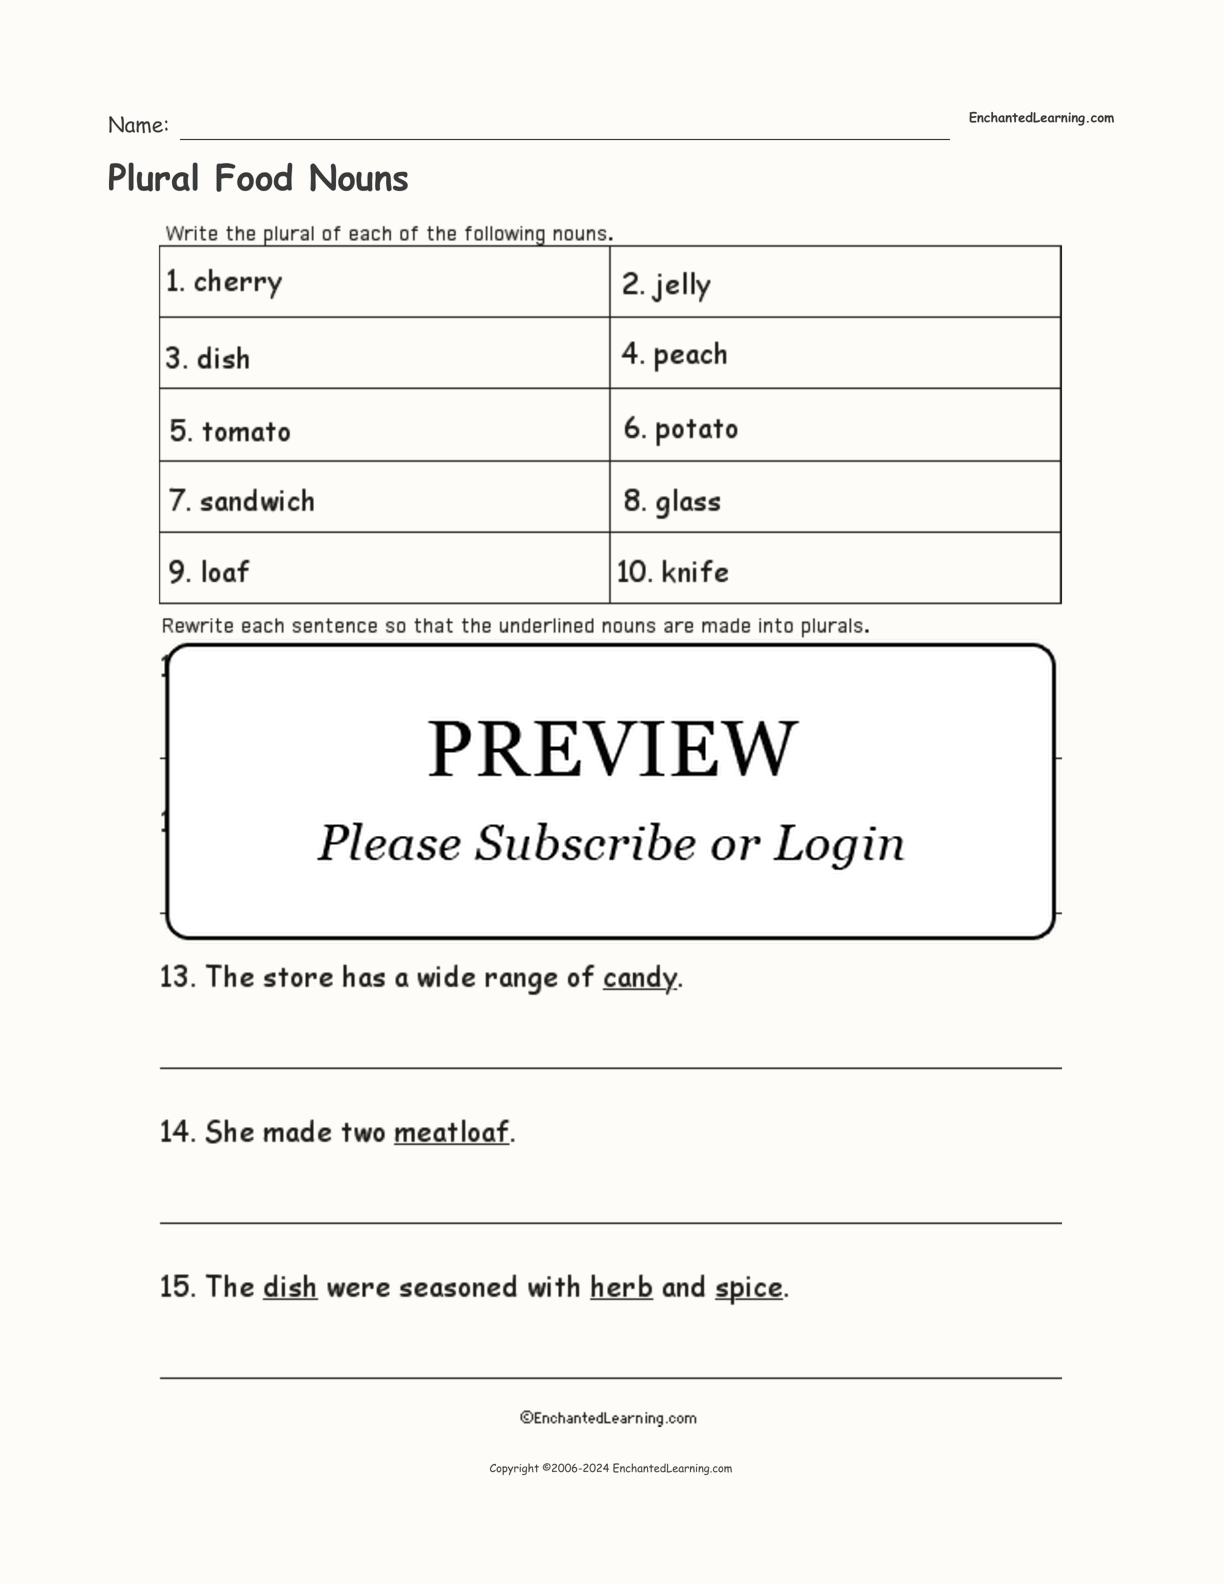 Plural Food Nouns interactive worksheet page 1